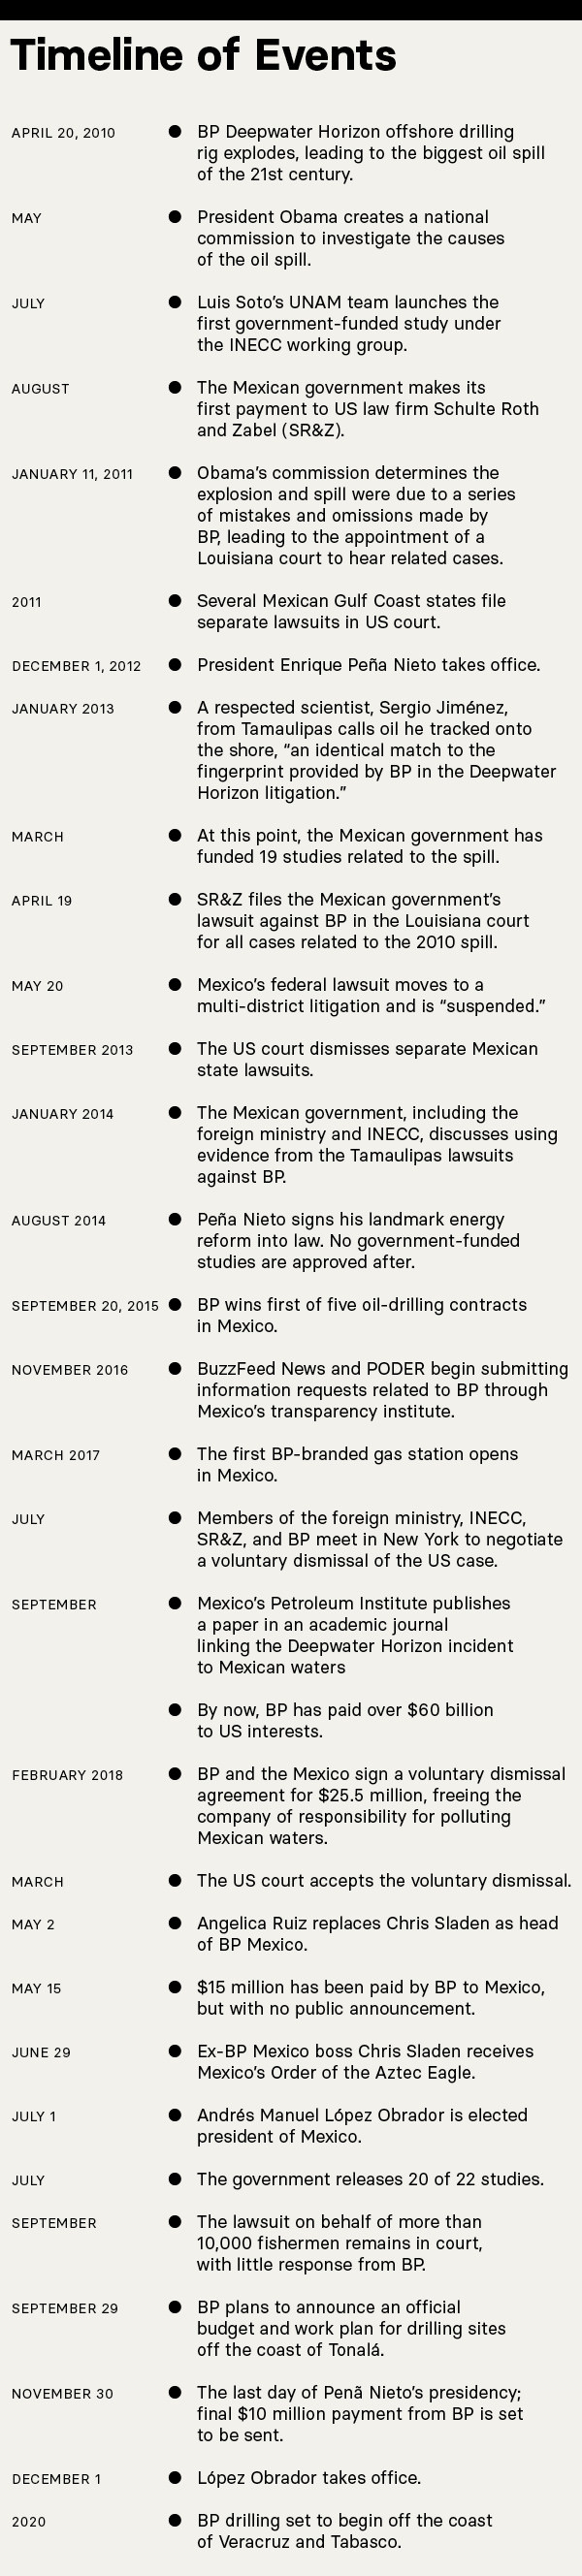 Revealed: Documents Show BP Quietly Paid Just $25 Million to Mexico ...